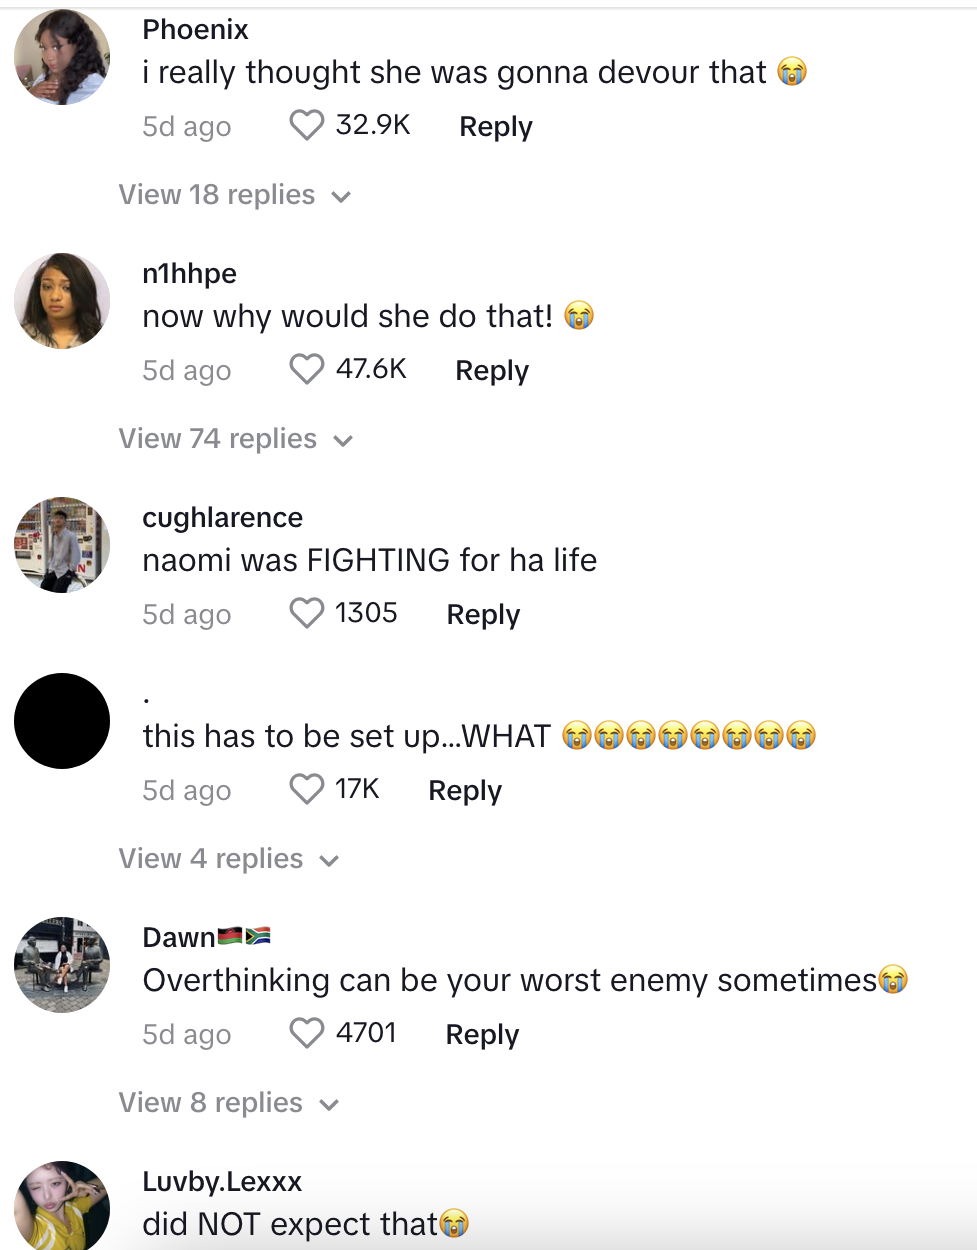 Comments on a social media post, users expressing surprise and humor over an unexpected situation